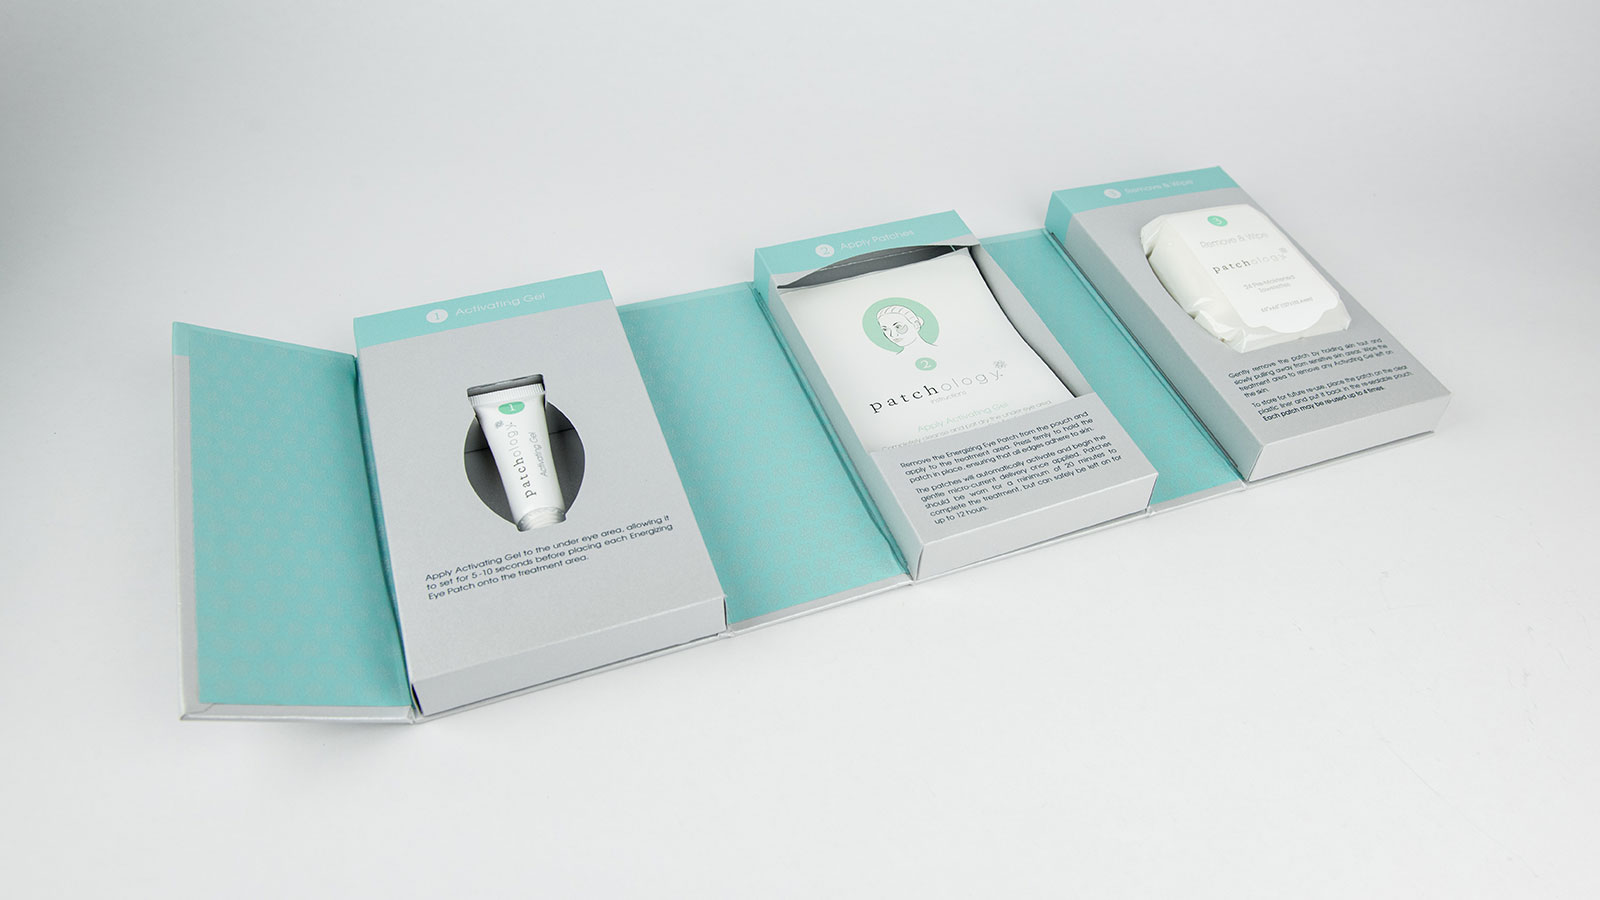 Patchology Packaging Fold Out Box Design